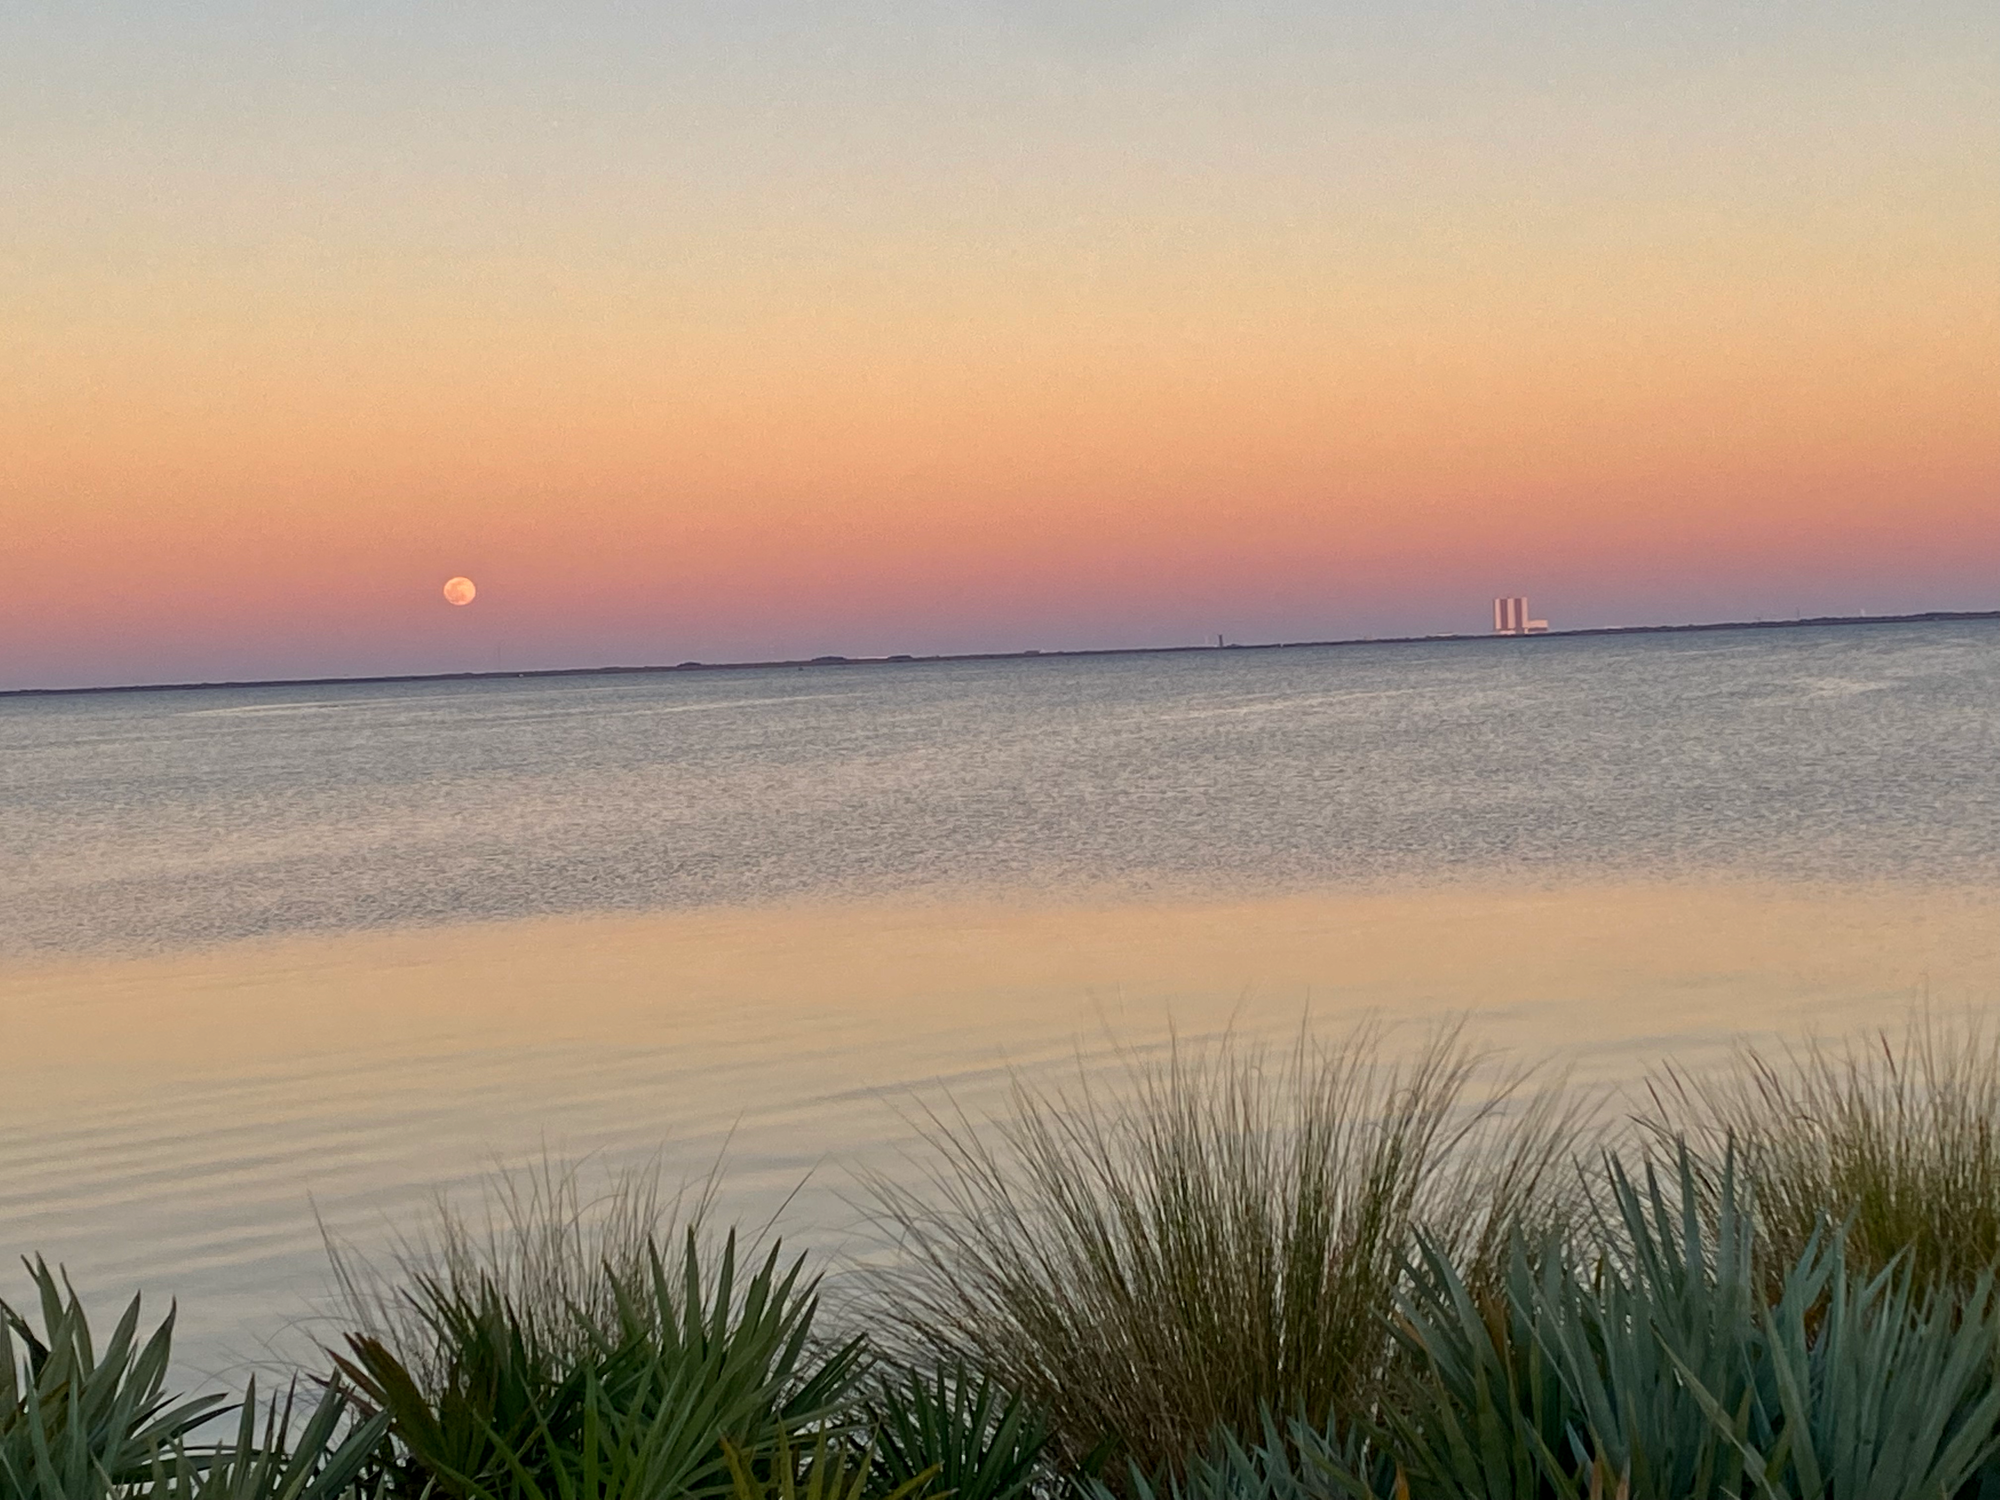 Indian River Lagoon at sunset. Full Moon on the left and Cape Canaveral launchpad on the right.